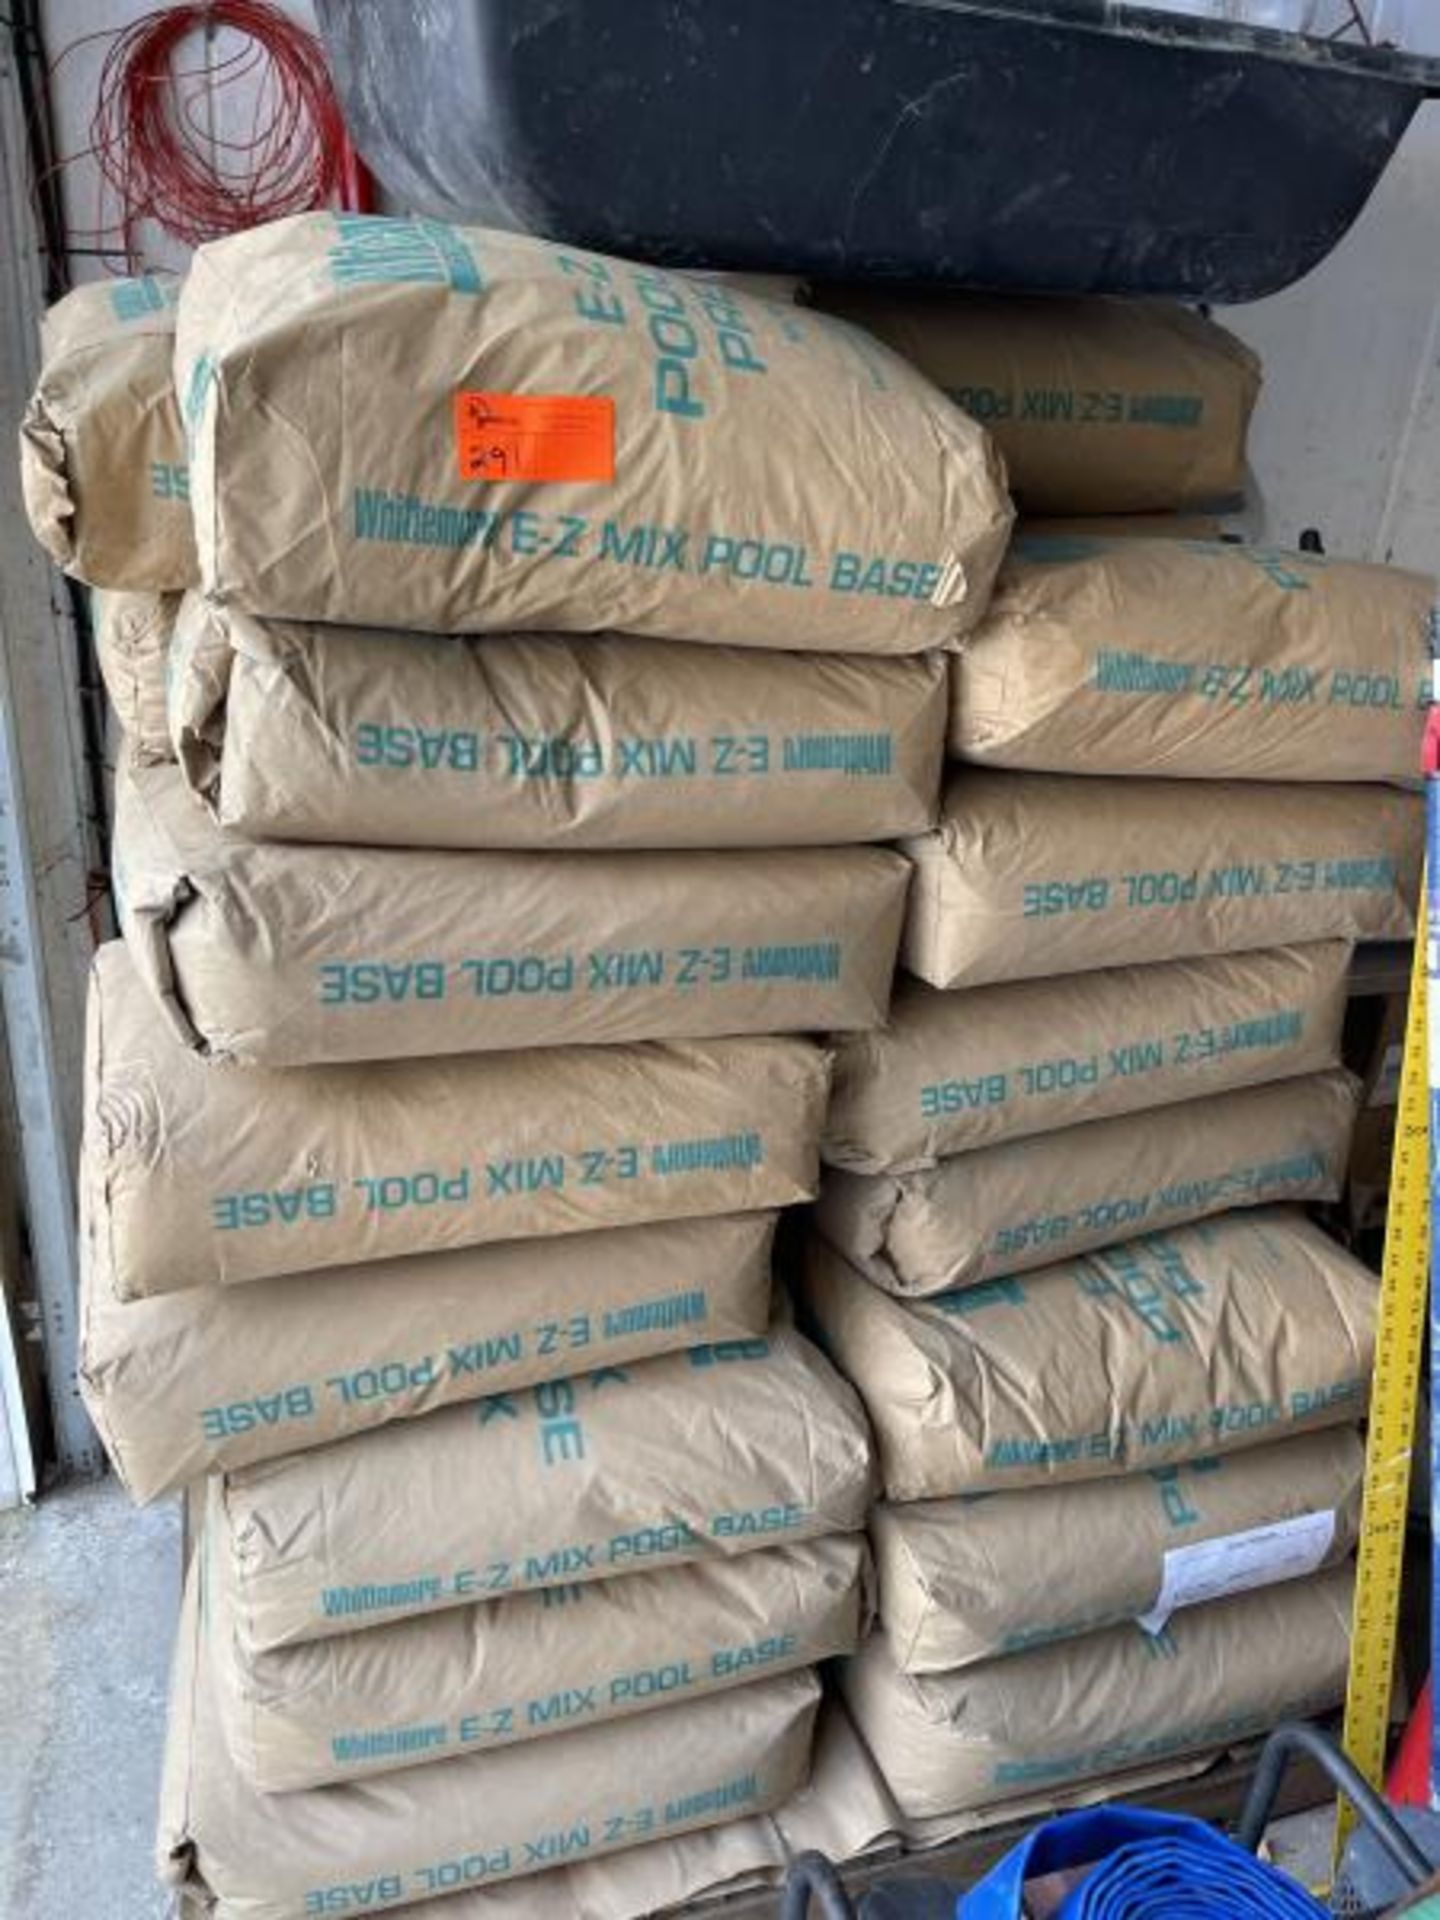 Whittemore E-Z mix pool base in 35# bags on pallet (+/-30)